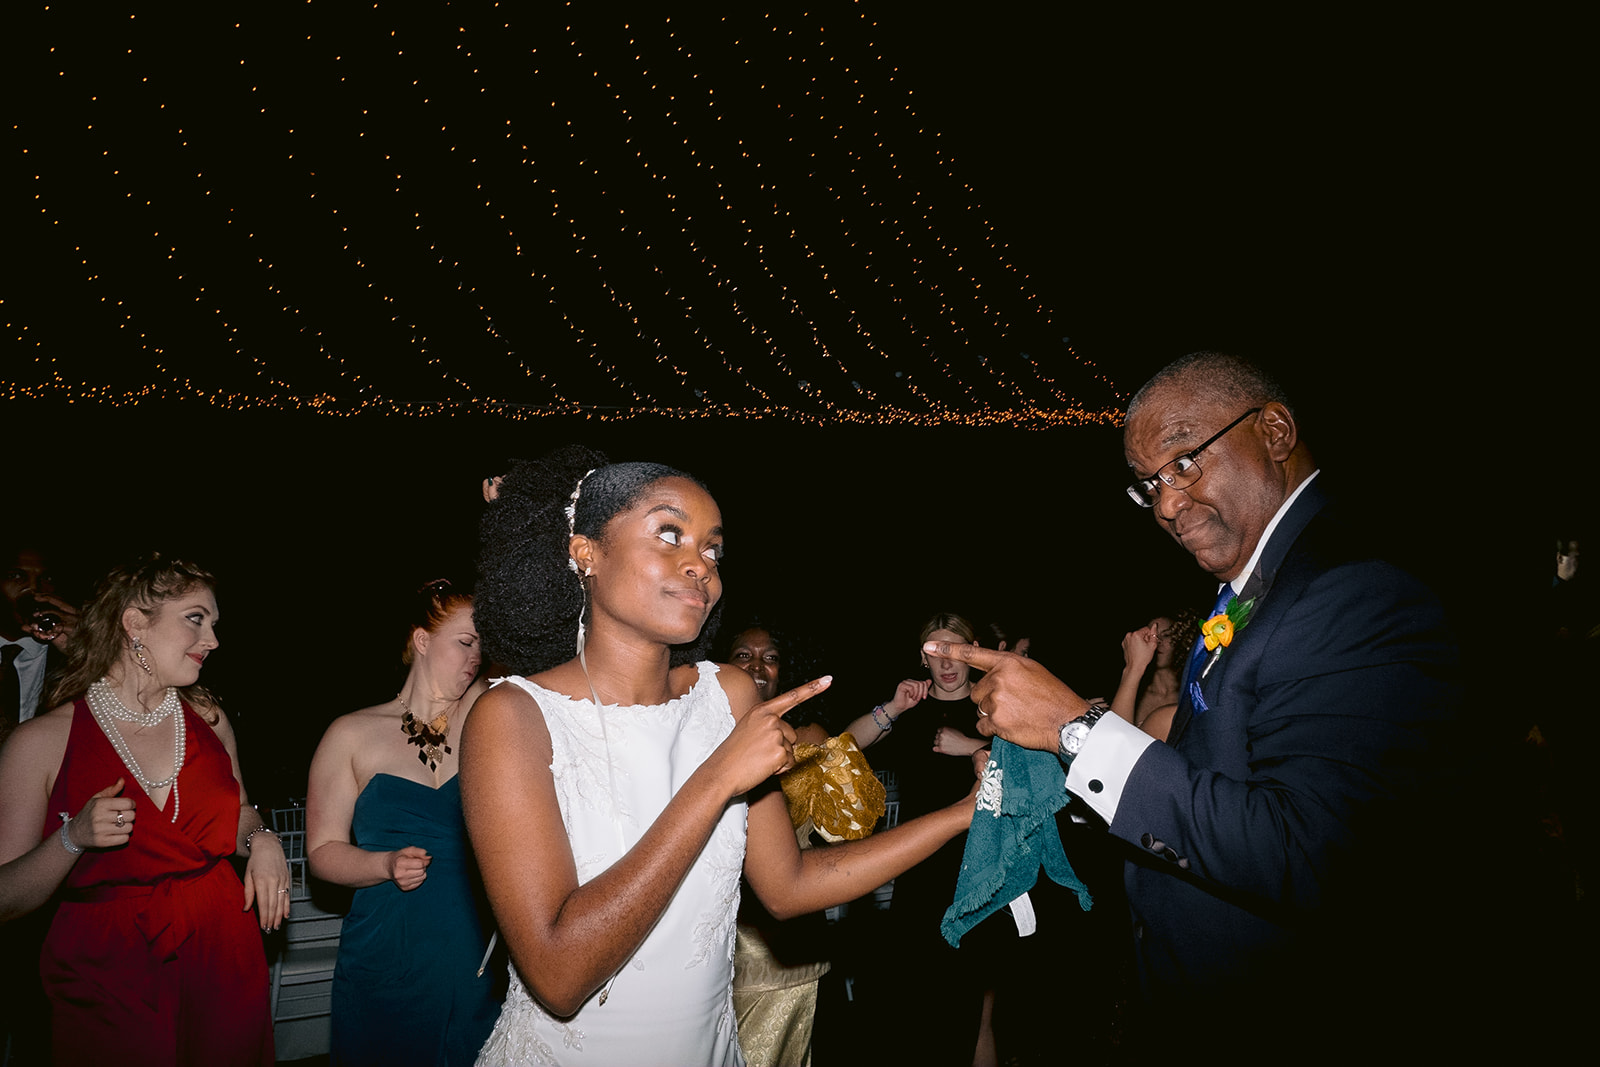 Candid moment of a bride and her dad during the reception.